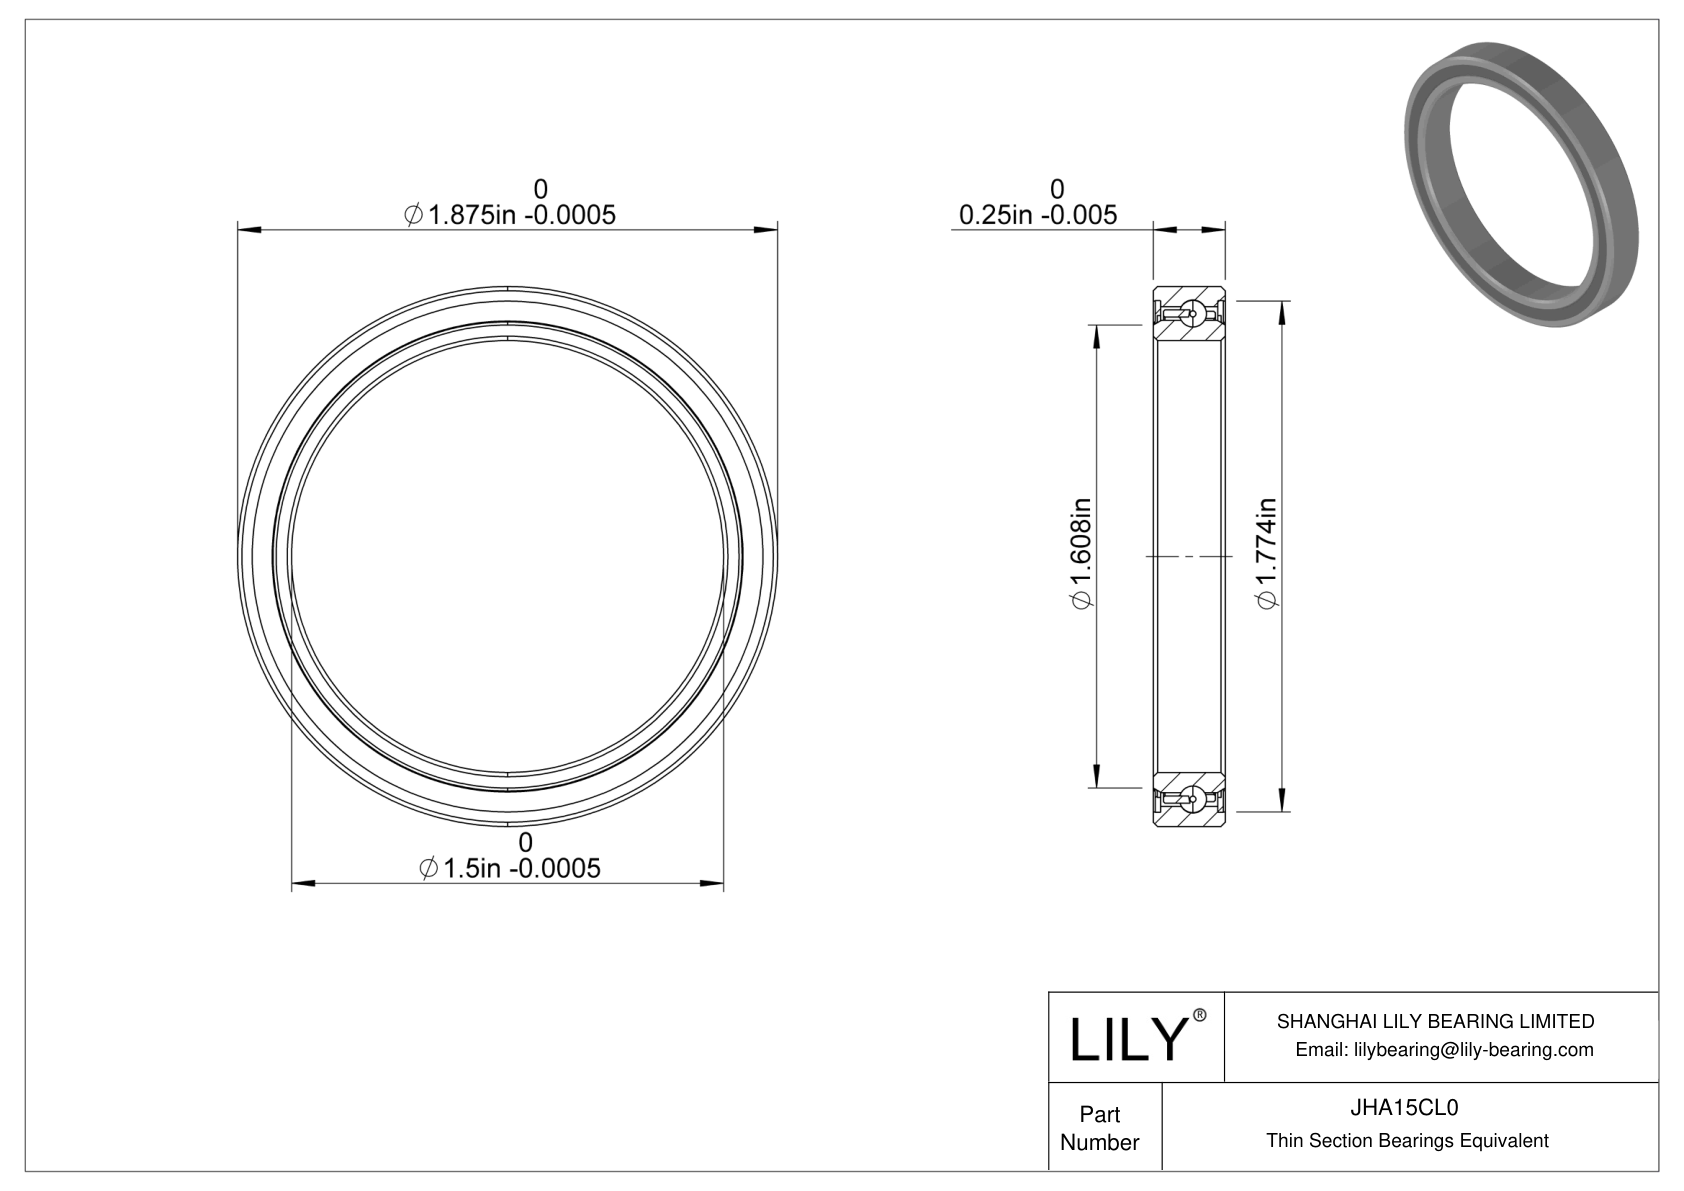 JHA15CL0 Constant Section (CS) Bearings cad drawing